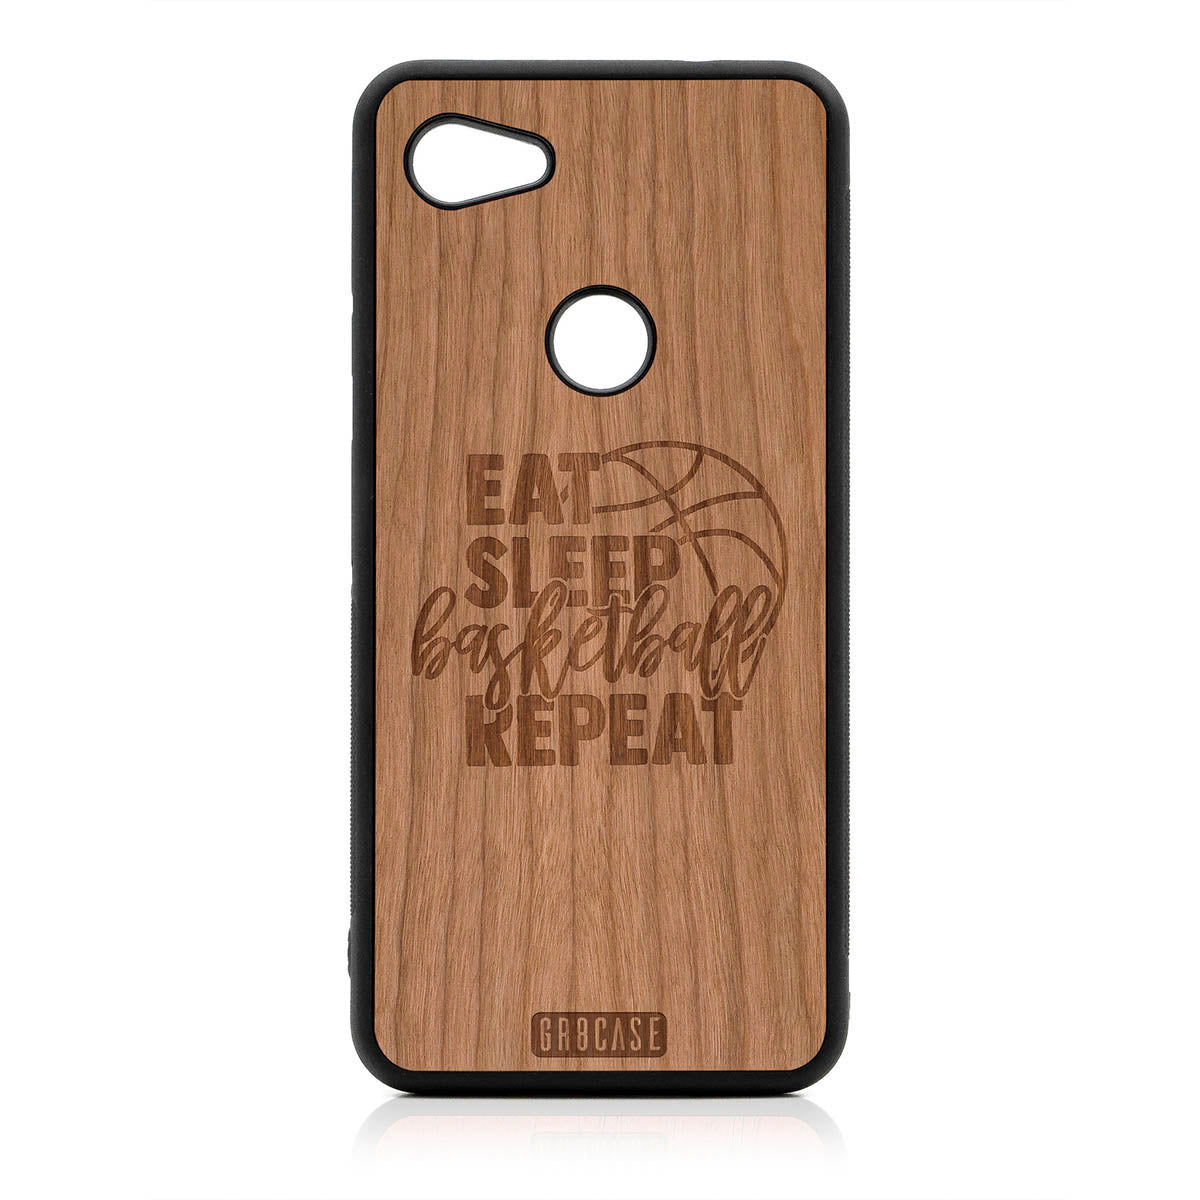 Eat Sleep Basketball Repeat Design Wood Case For Google Pixel 3A